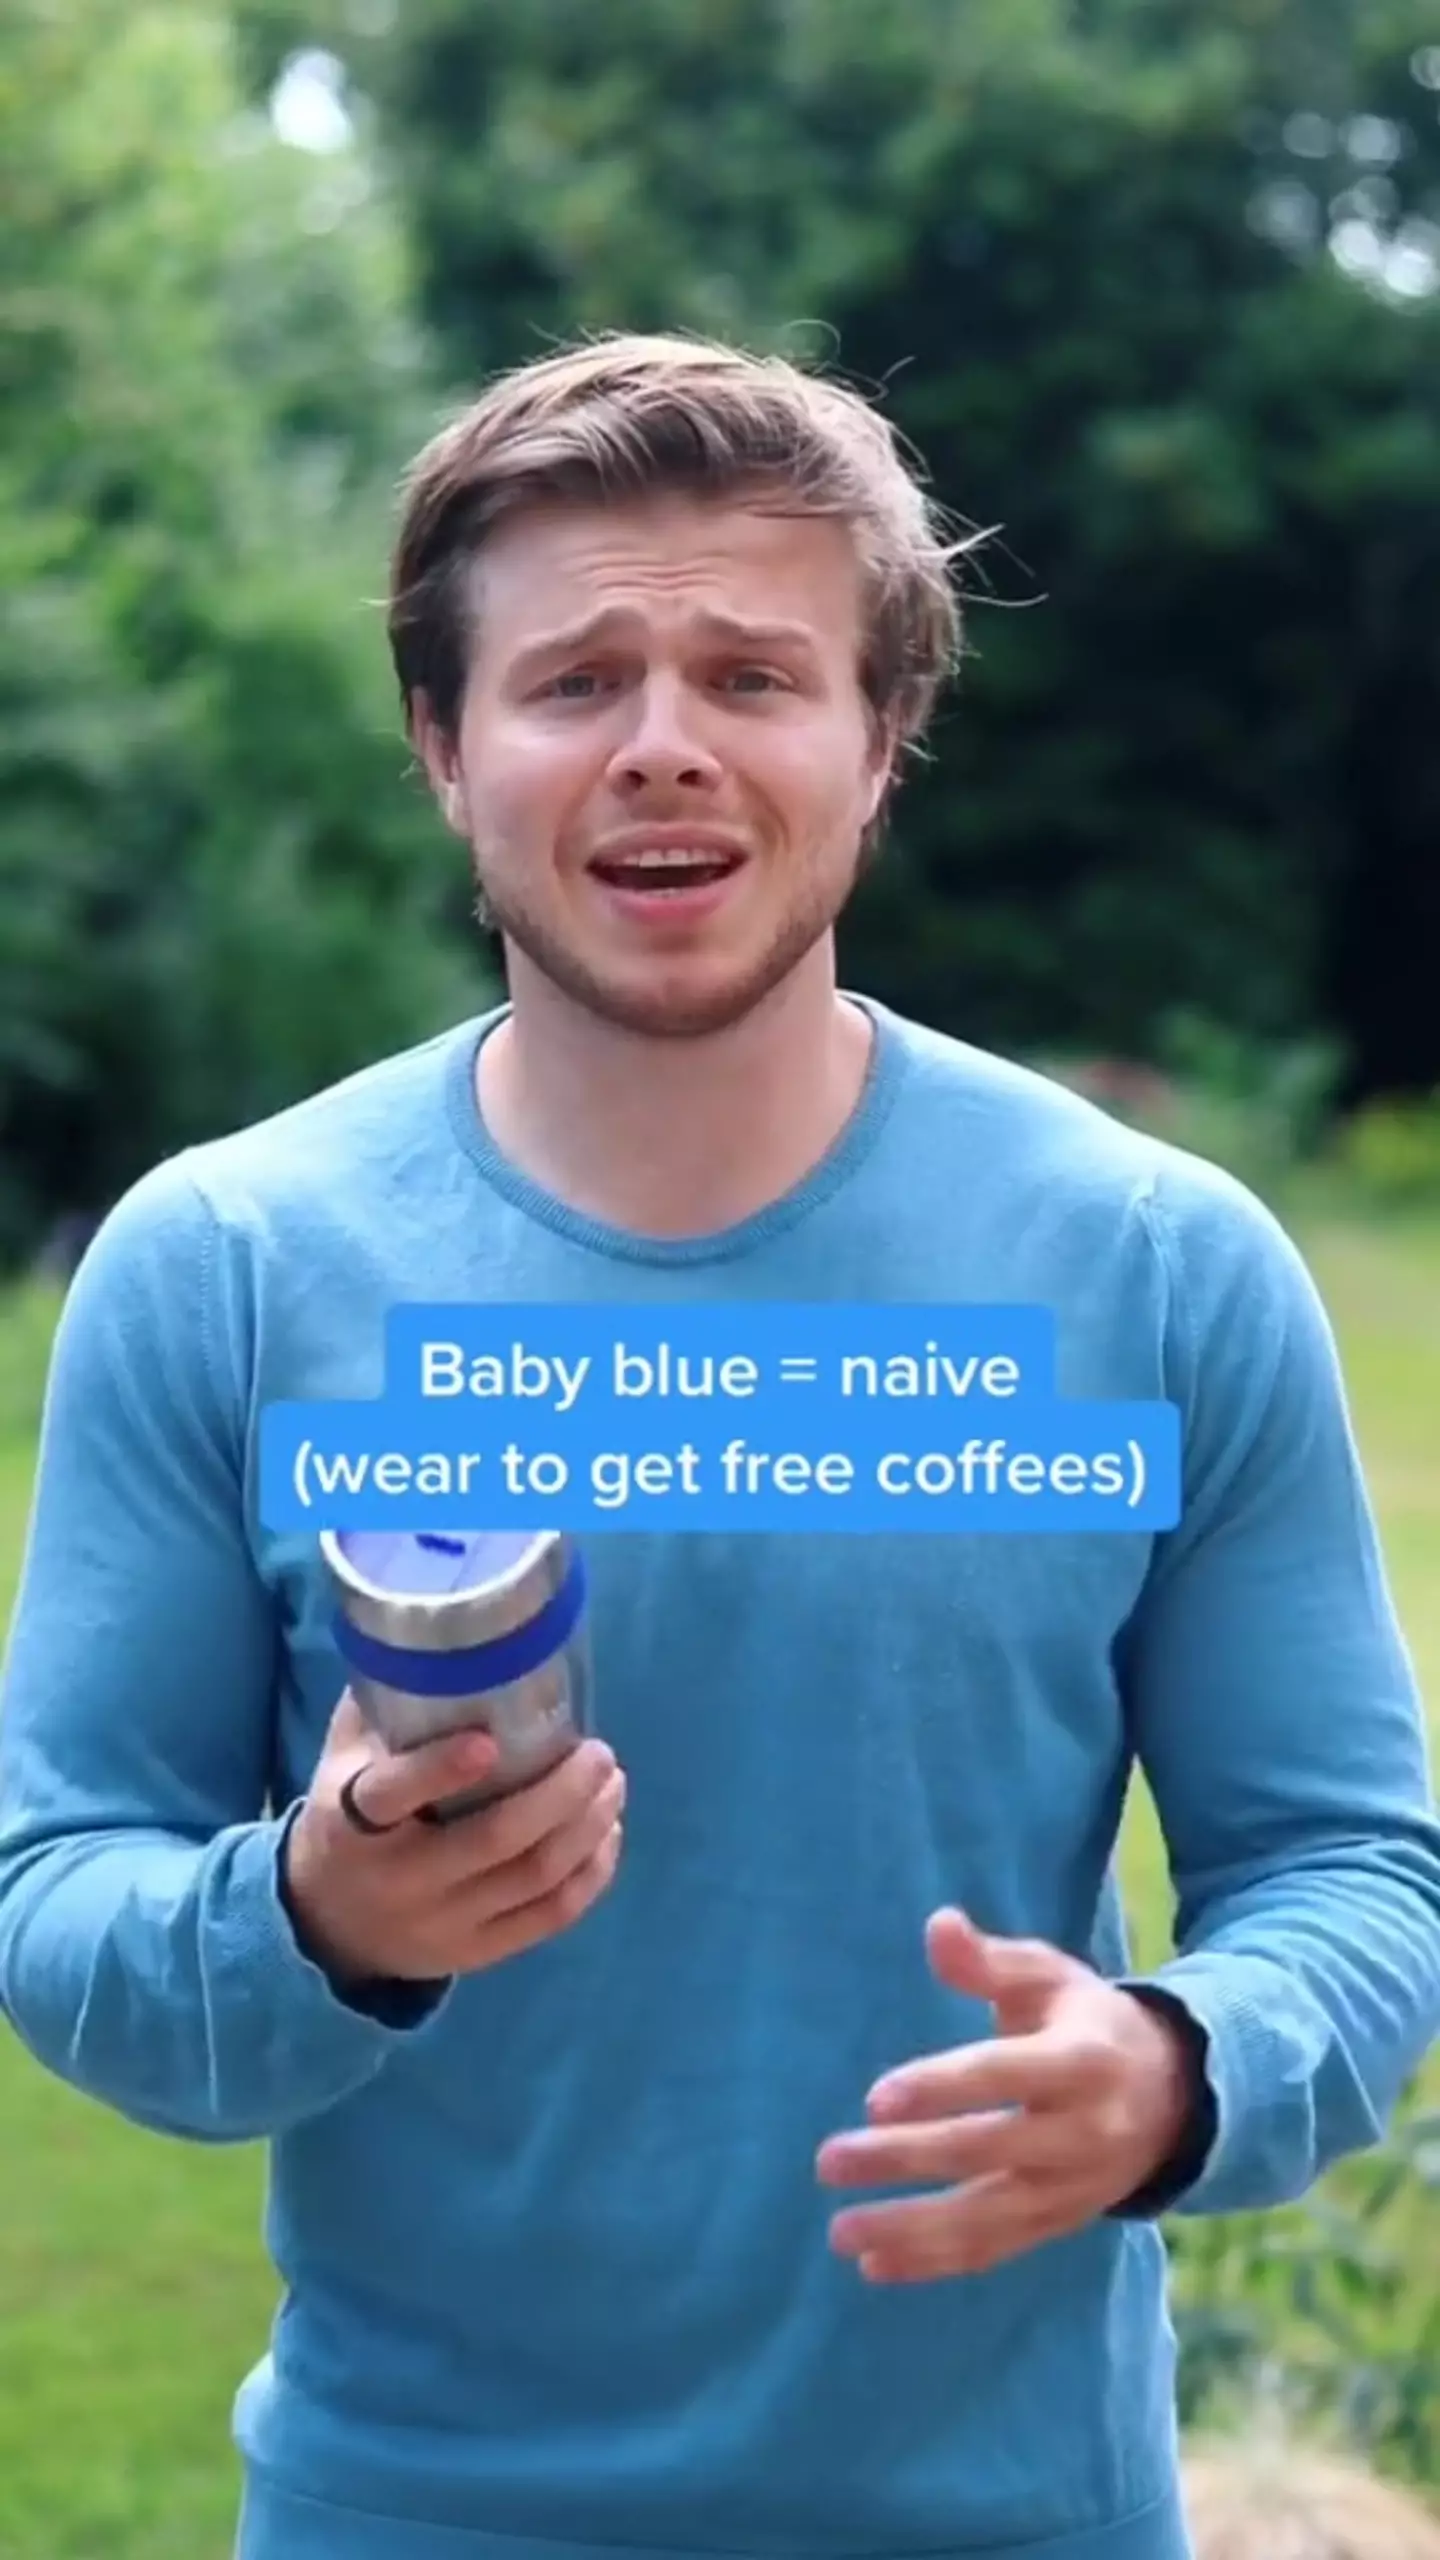 Apparently, wearing baby blue is the answer to getting free coffees.